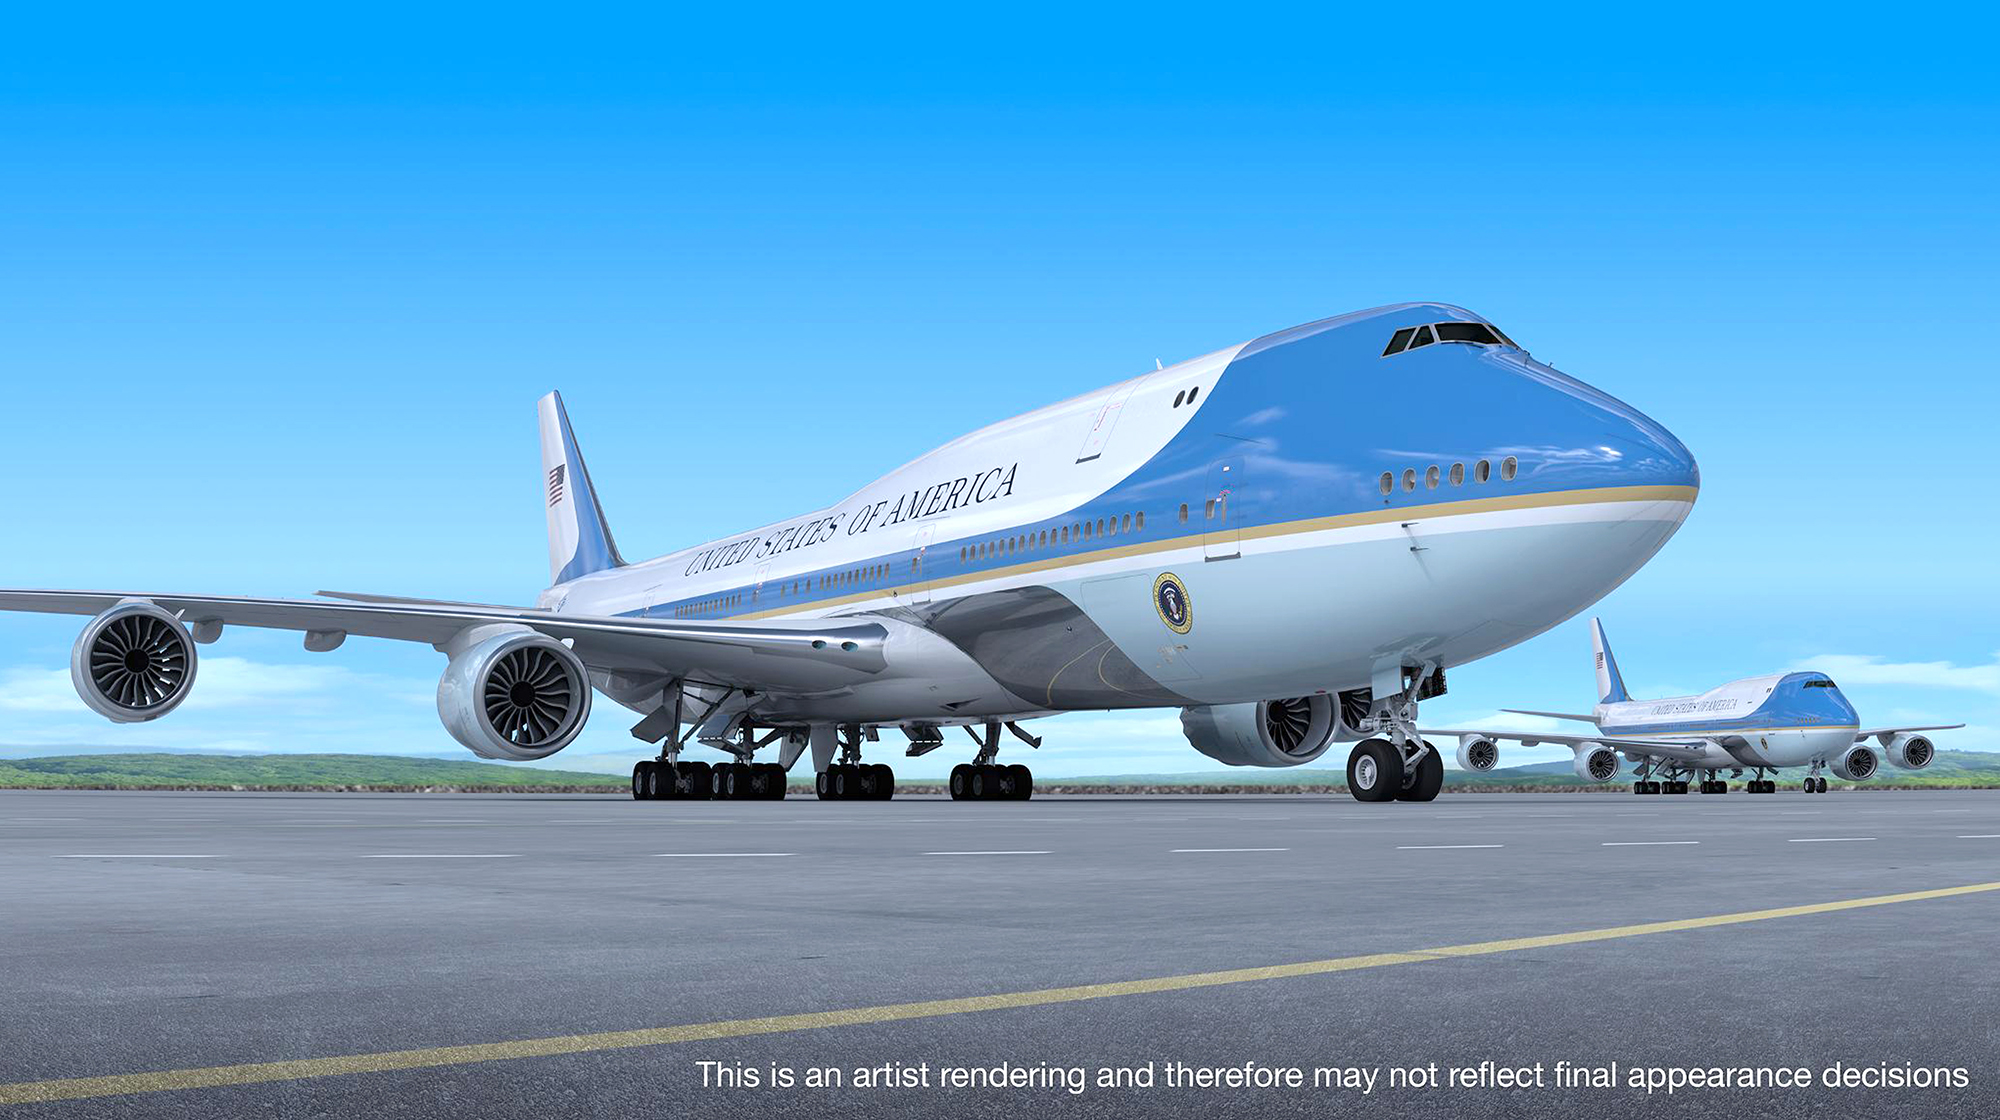 New Charge Pushes Boeing’s Air Force One Losses to $1.3 Billion